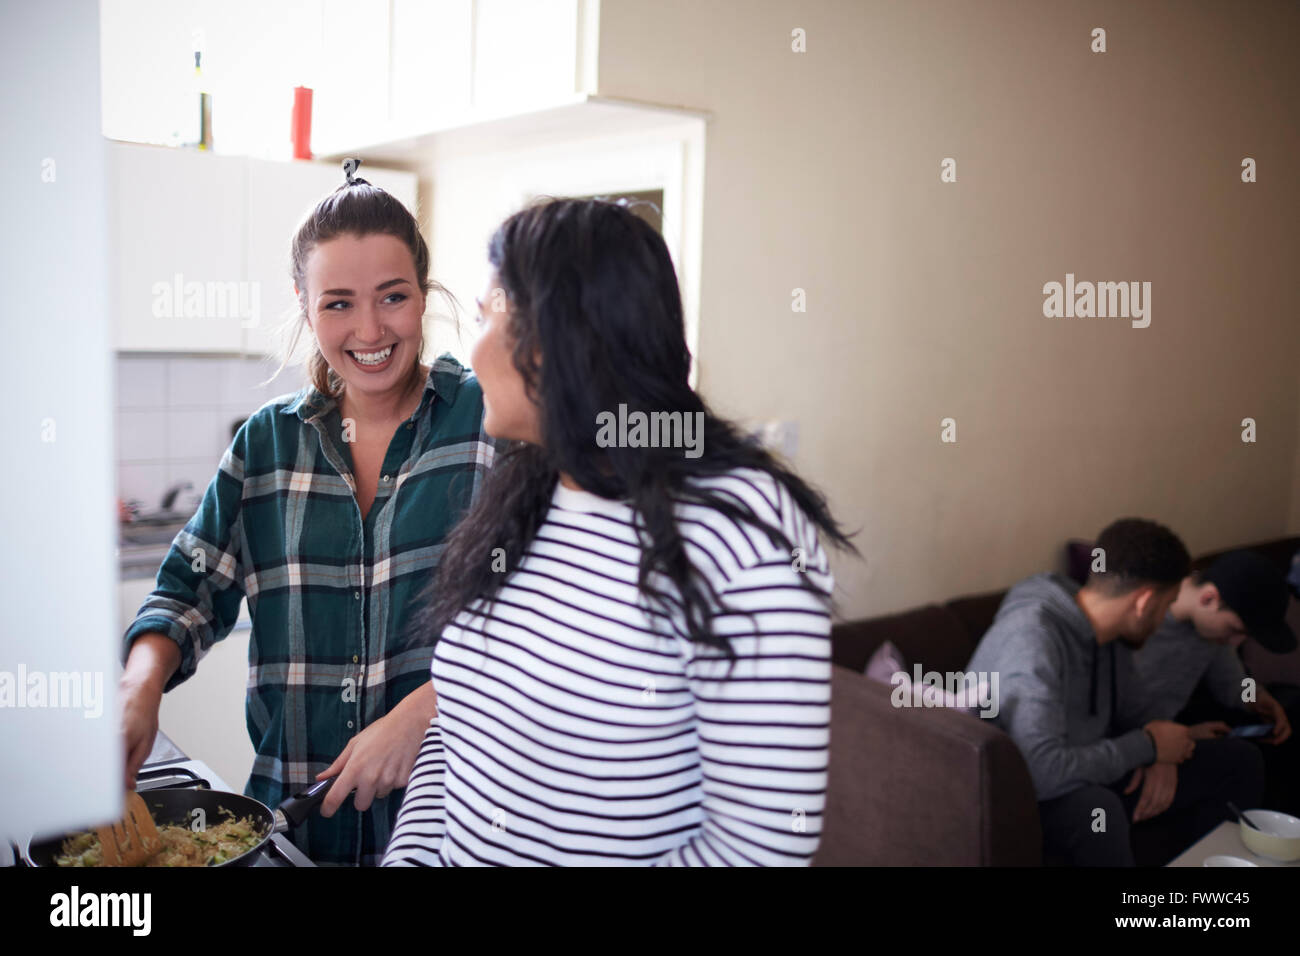 Group Of Students Hanging Out In Shared House Together Stock Photo